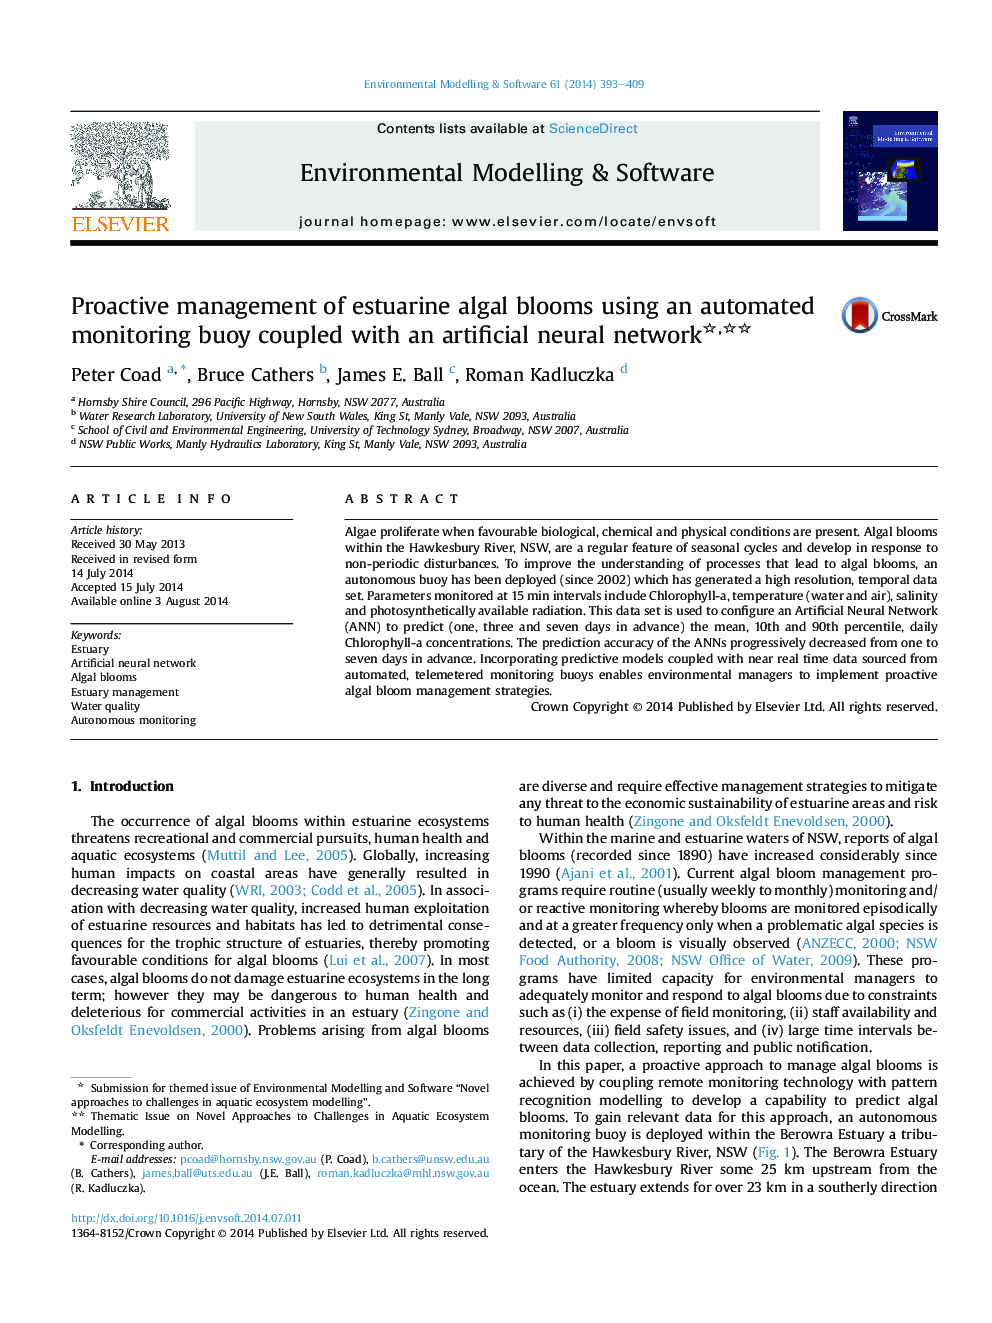 Proactive management of estuarine algal blooms using an automated monitoring buoy coupled with an artificial neural network